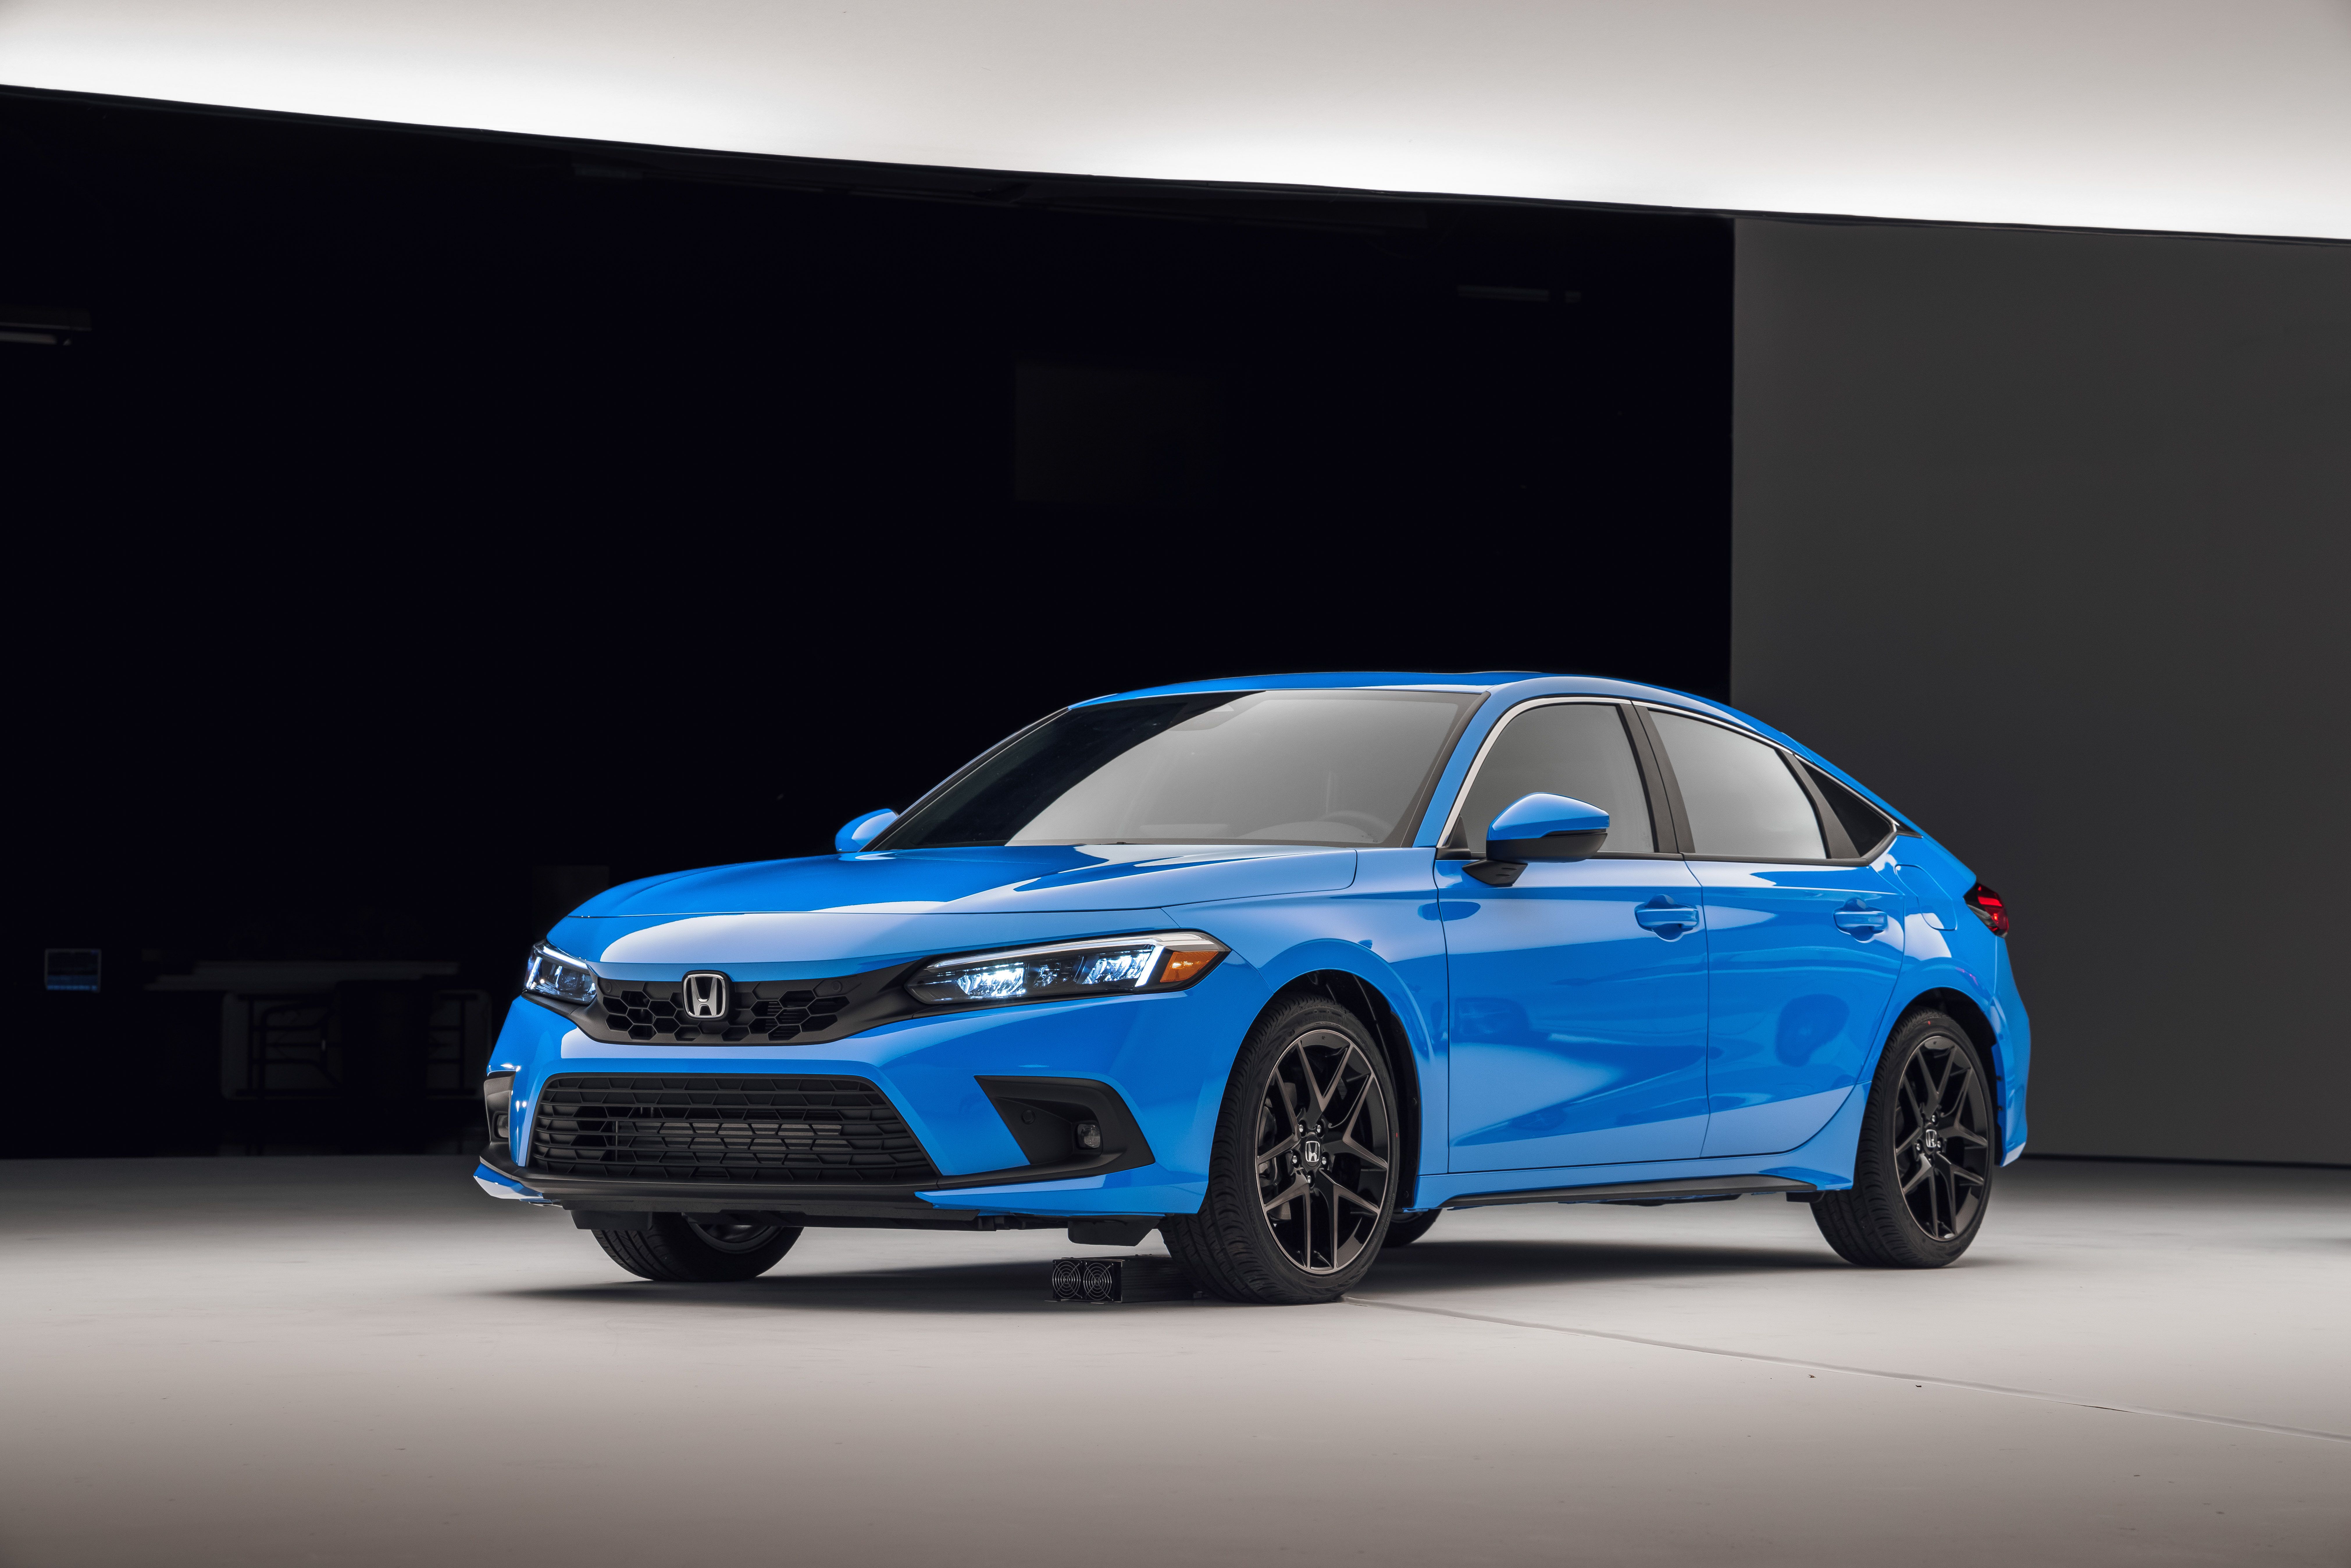 2022 Honda Civic Hatchback Looks Great and Offers a Manual